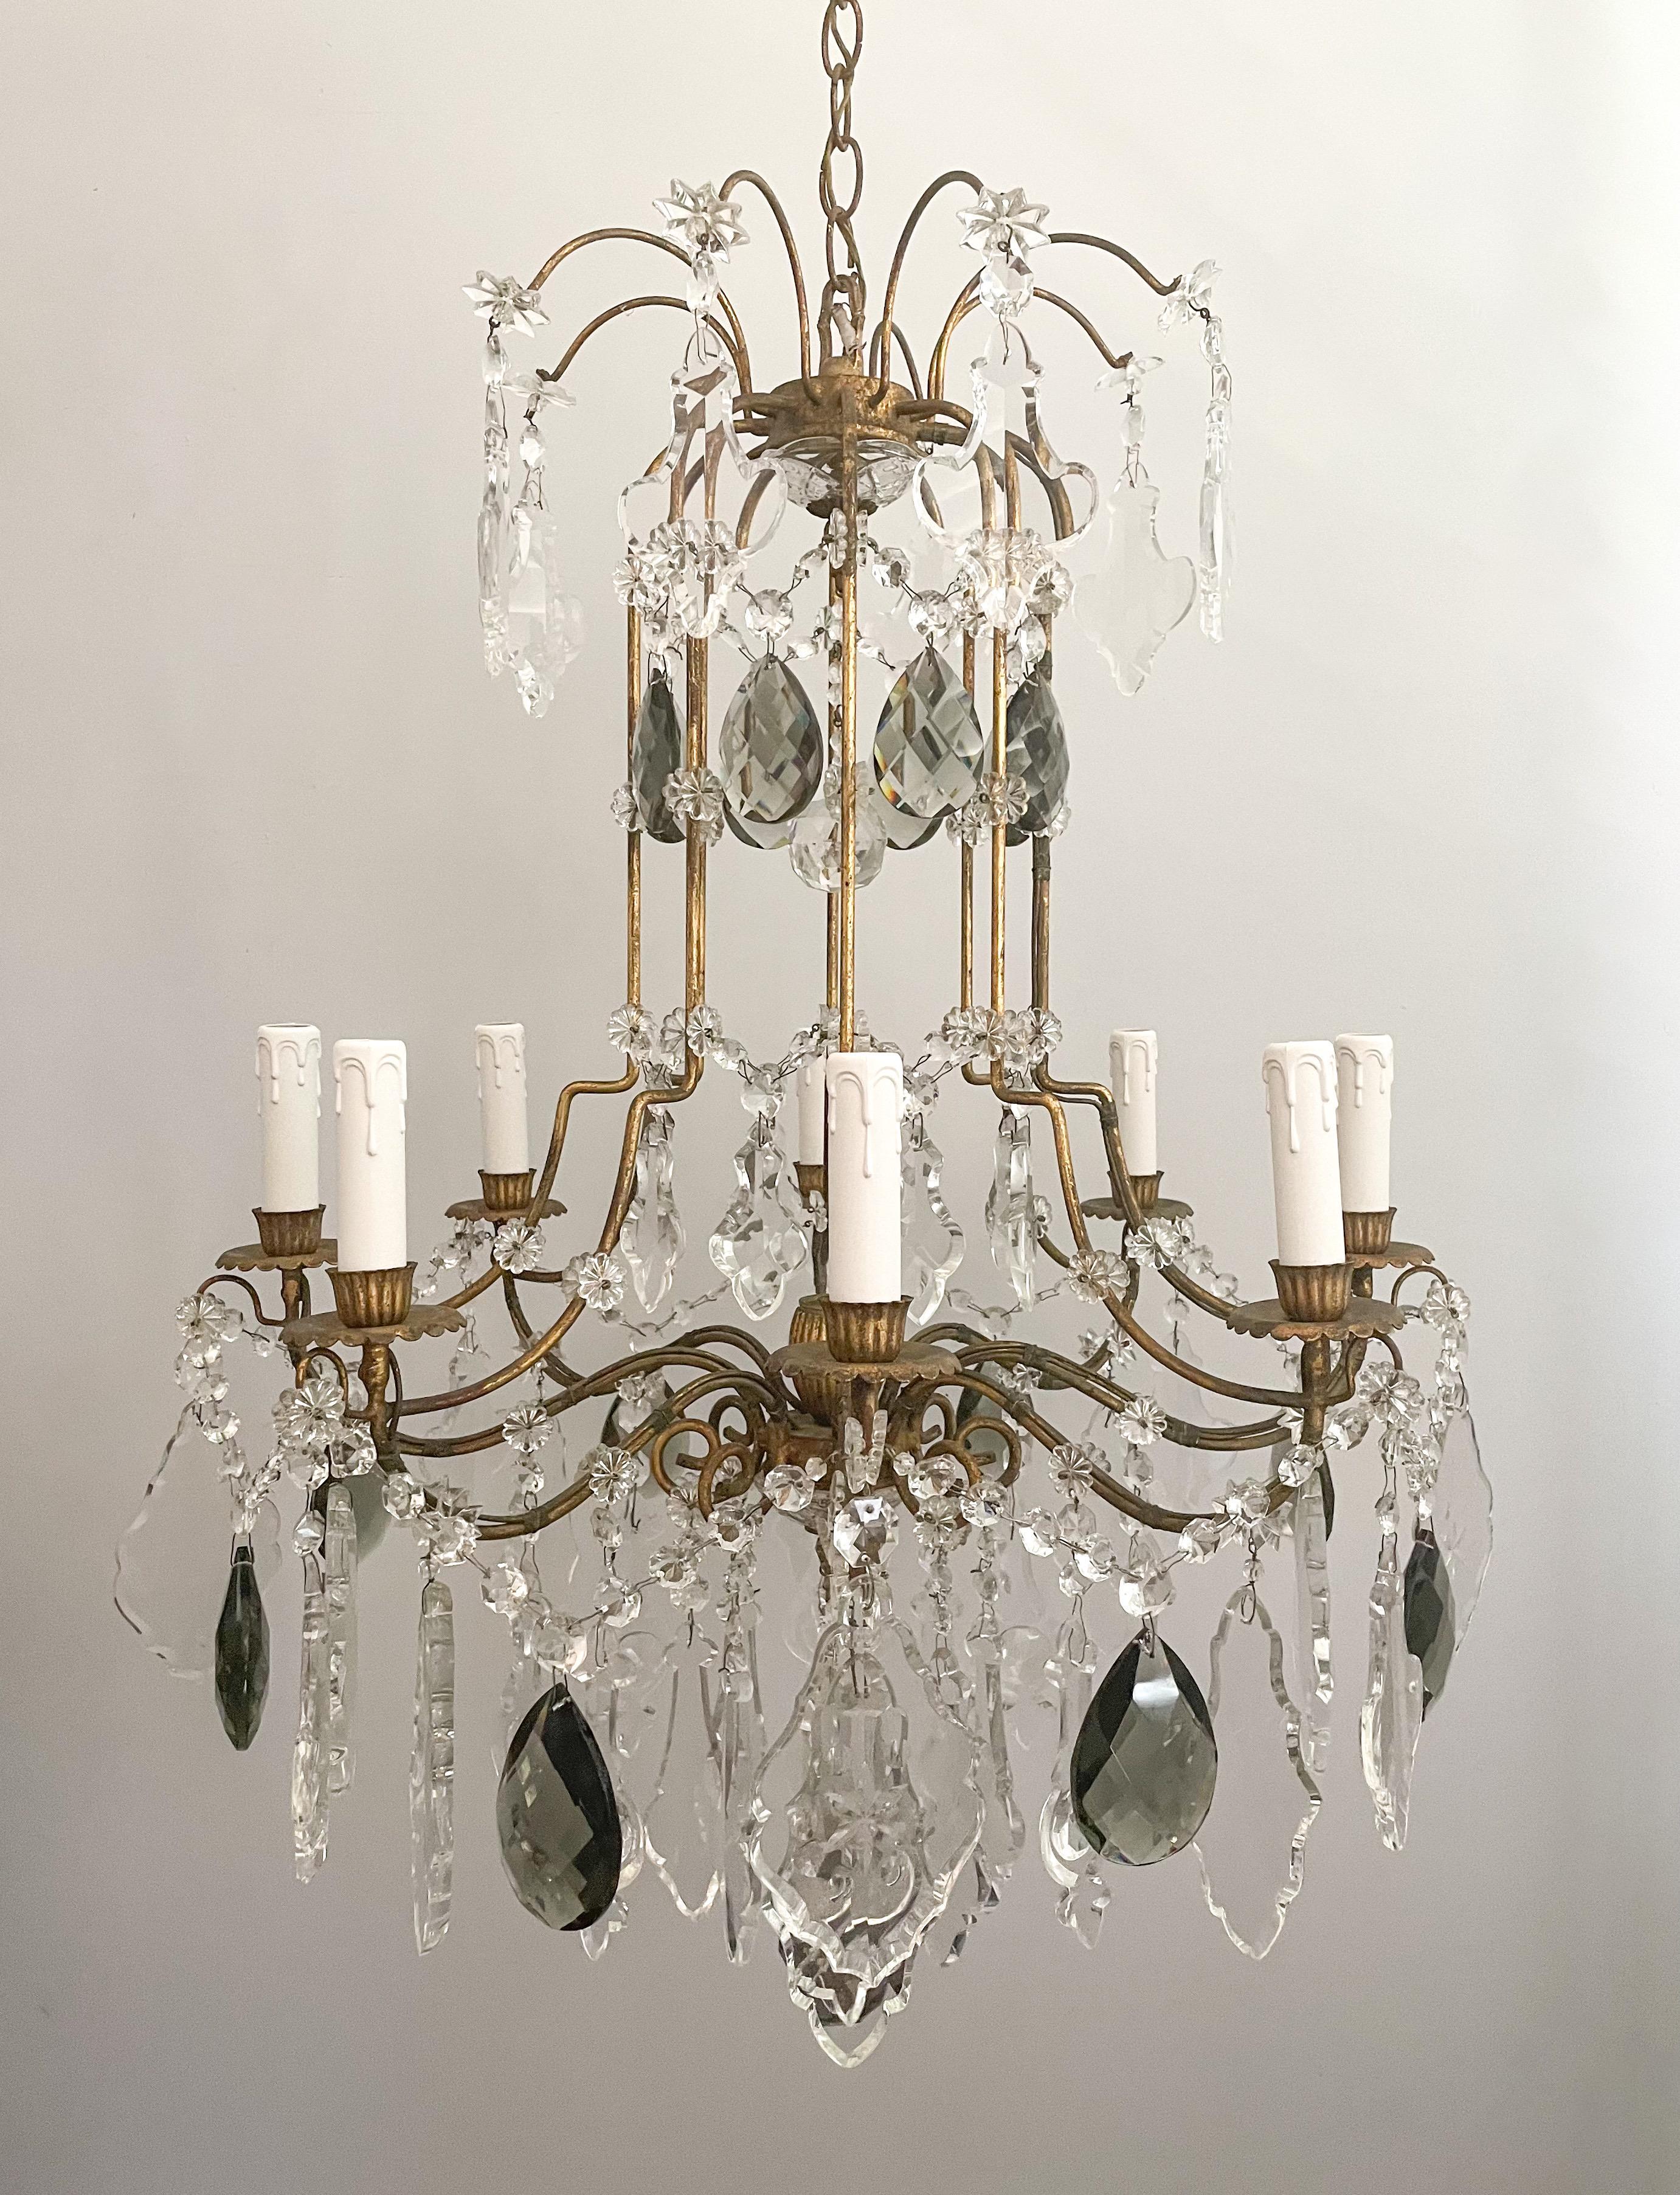 Beautiful, 1950s Italian gilt-iron and crystal chandelier in the neoclassical style.

The chandelier features a scrolled iron frame with a gilded finish and is decorated with an assortment of impressive crystal prisms including some very nice